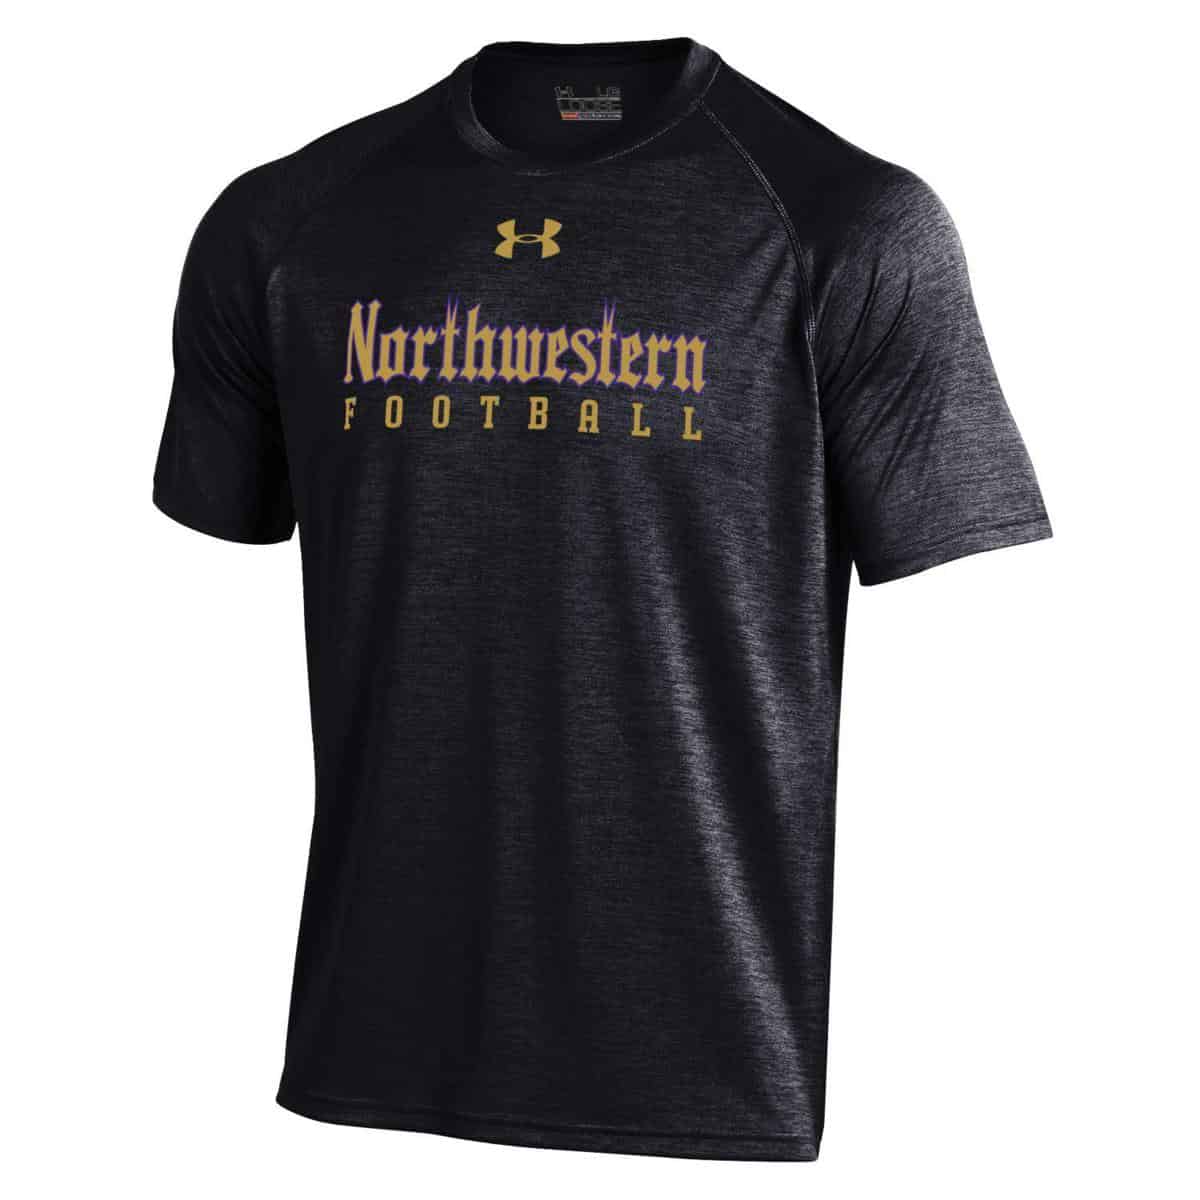 Northwestern Wildcats: Buy Under Armour Basketball Jerseys and more, Campus Gear Online